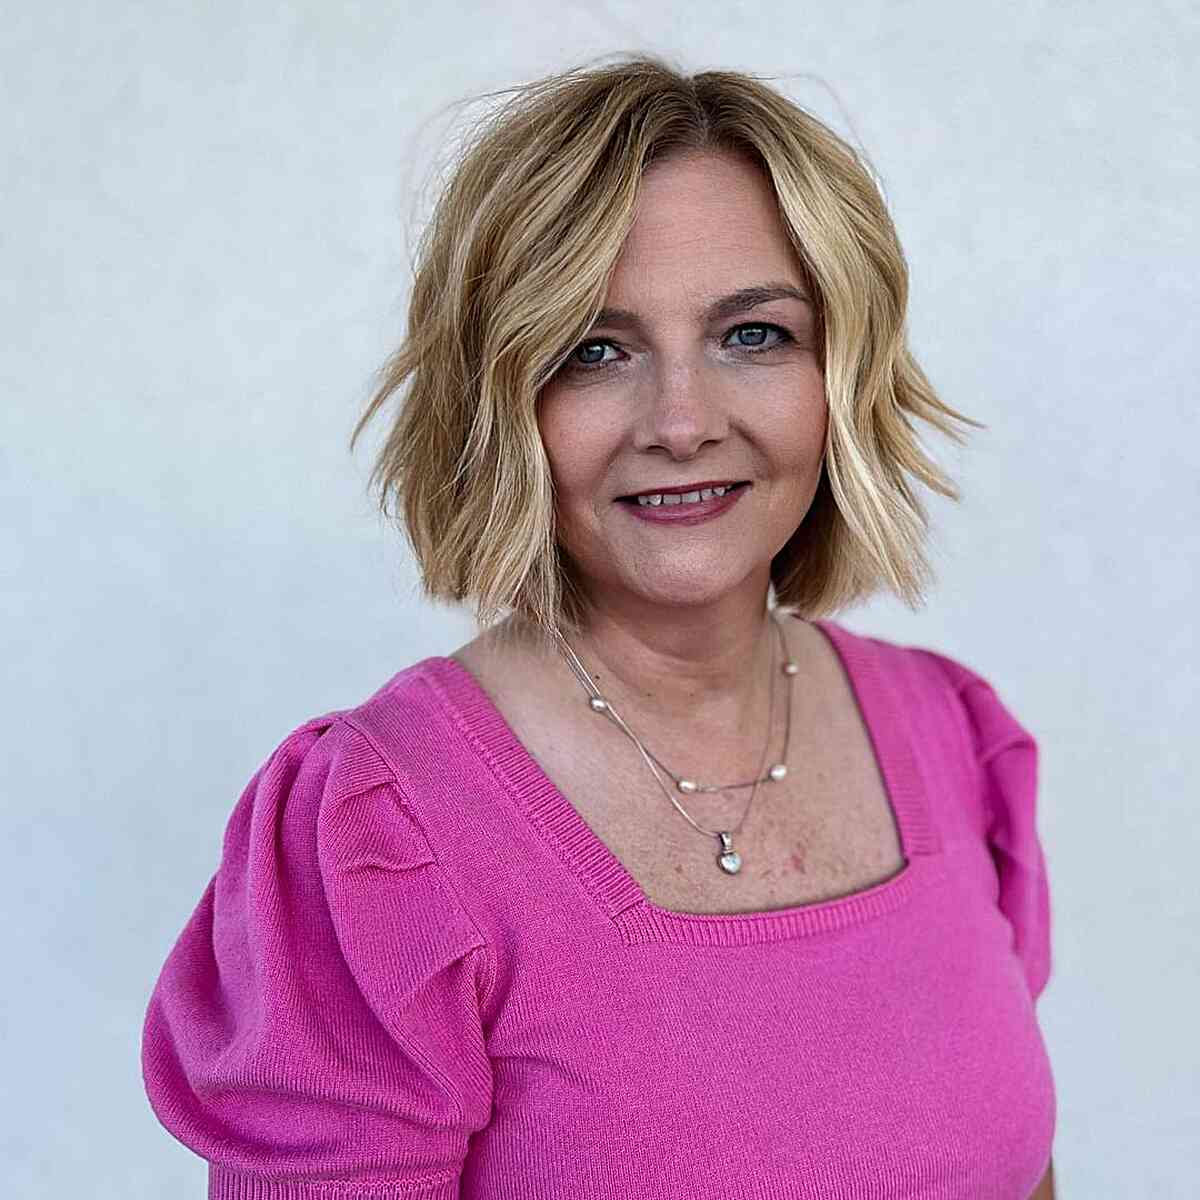 Modern Textured Bob Haircut for 50-Year-Olds